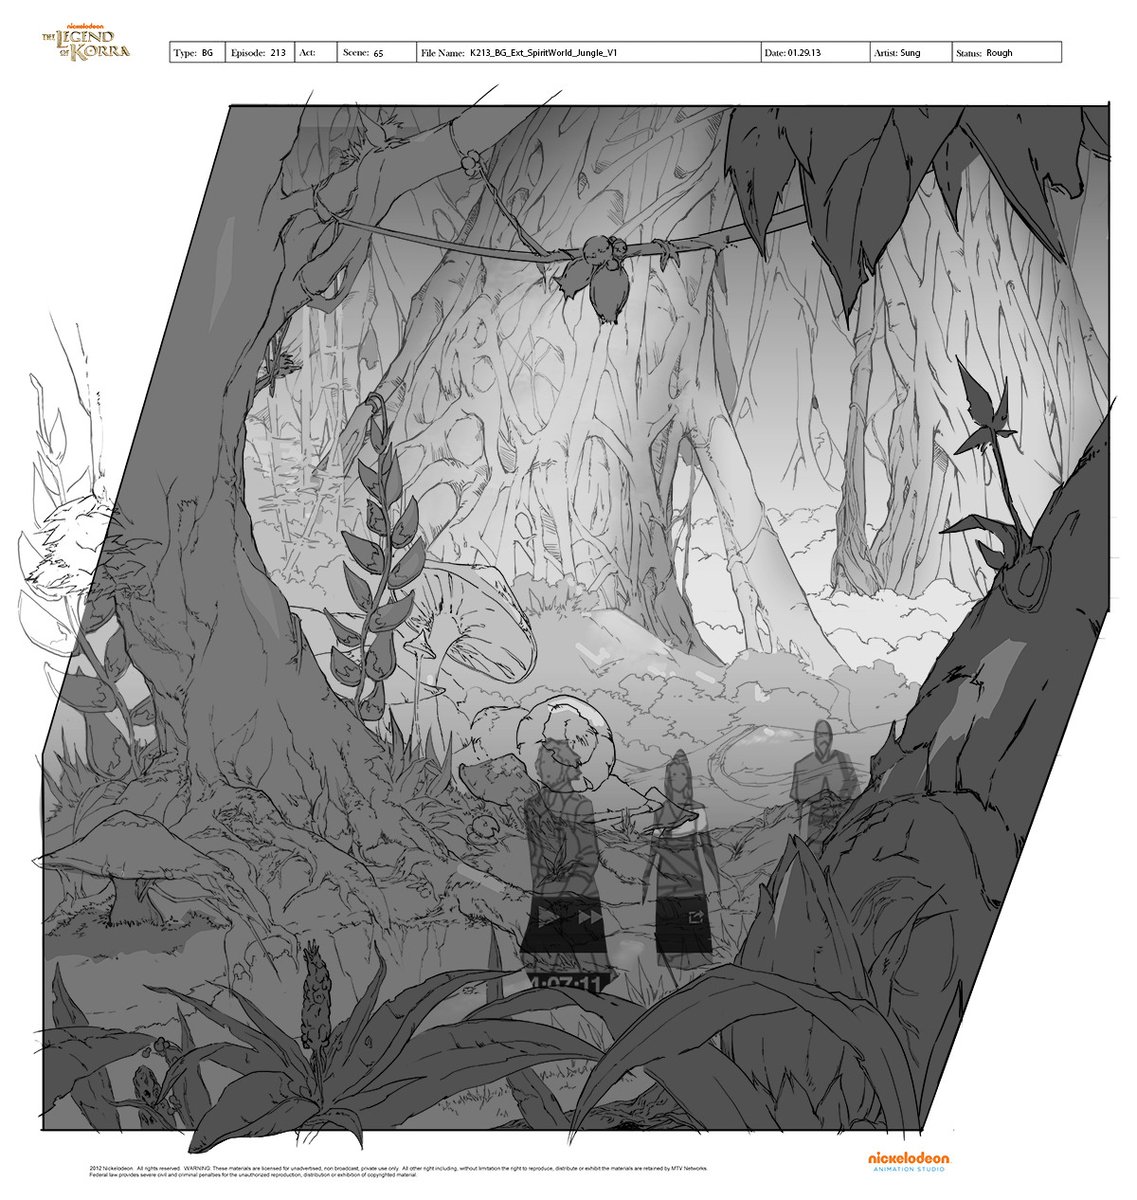 I'll be hosting one more bg design class this year! I always think it's going to be my last class, but watching all my students grow brings me so much joy! If you are interested in getting on the waitlist, please visit: 

https://t.co/F8GaQFD1Au

Thank you for all the support! 